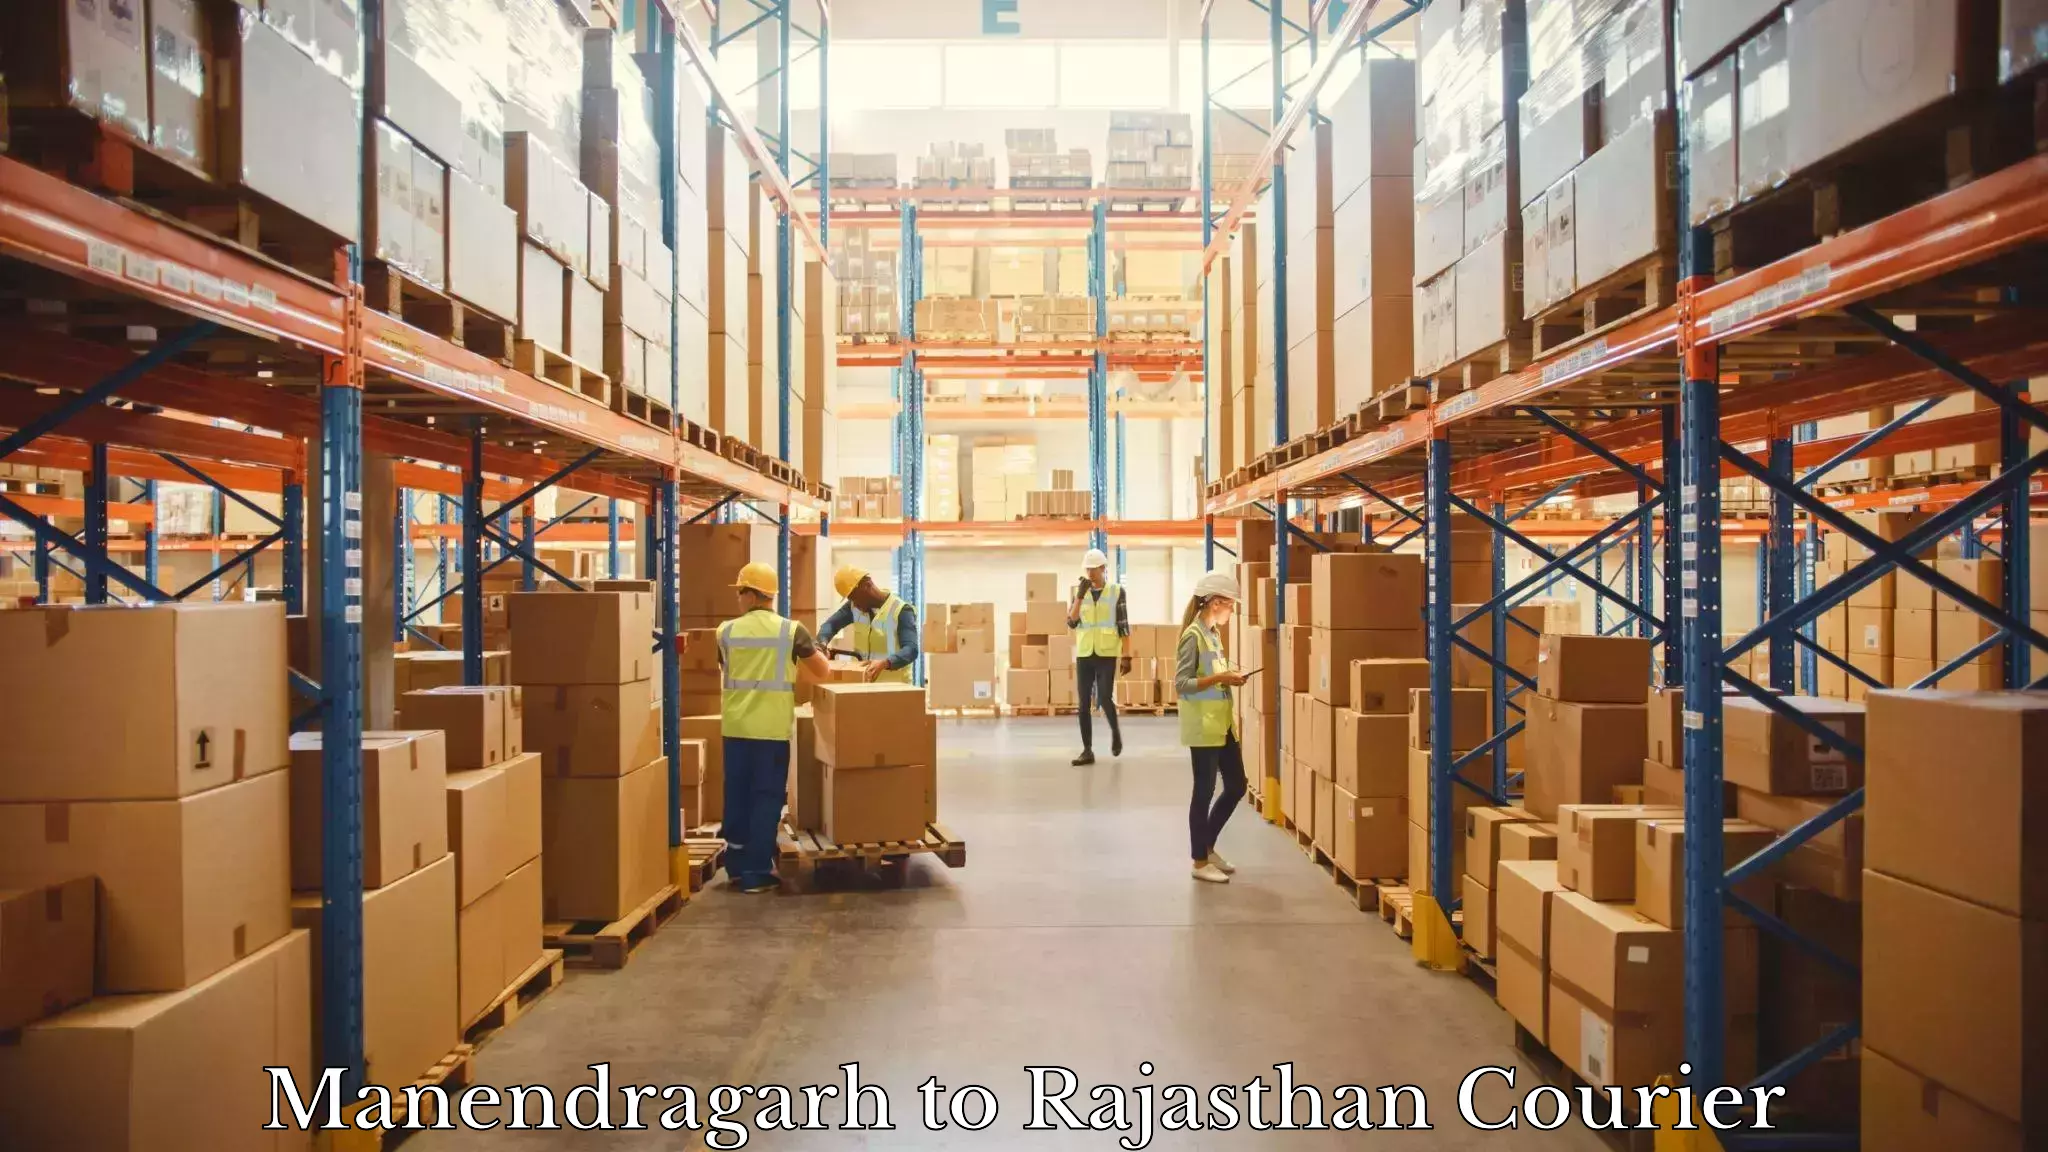 Reliable logistics providers Manendragarh to Weir